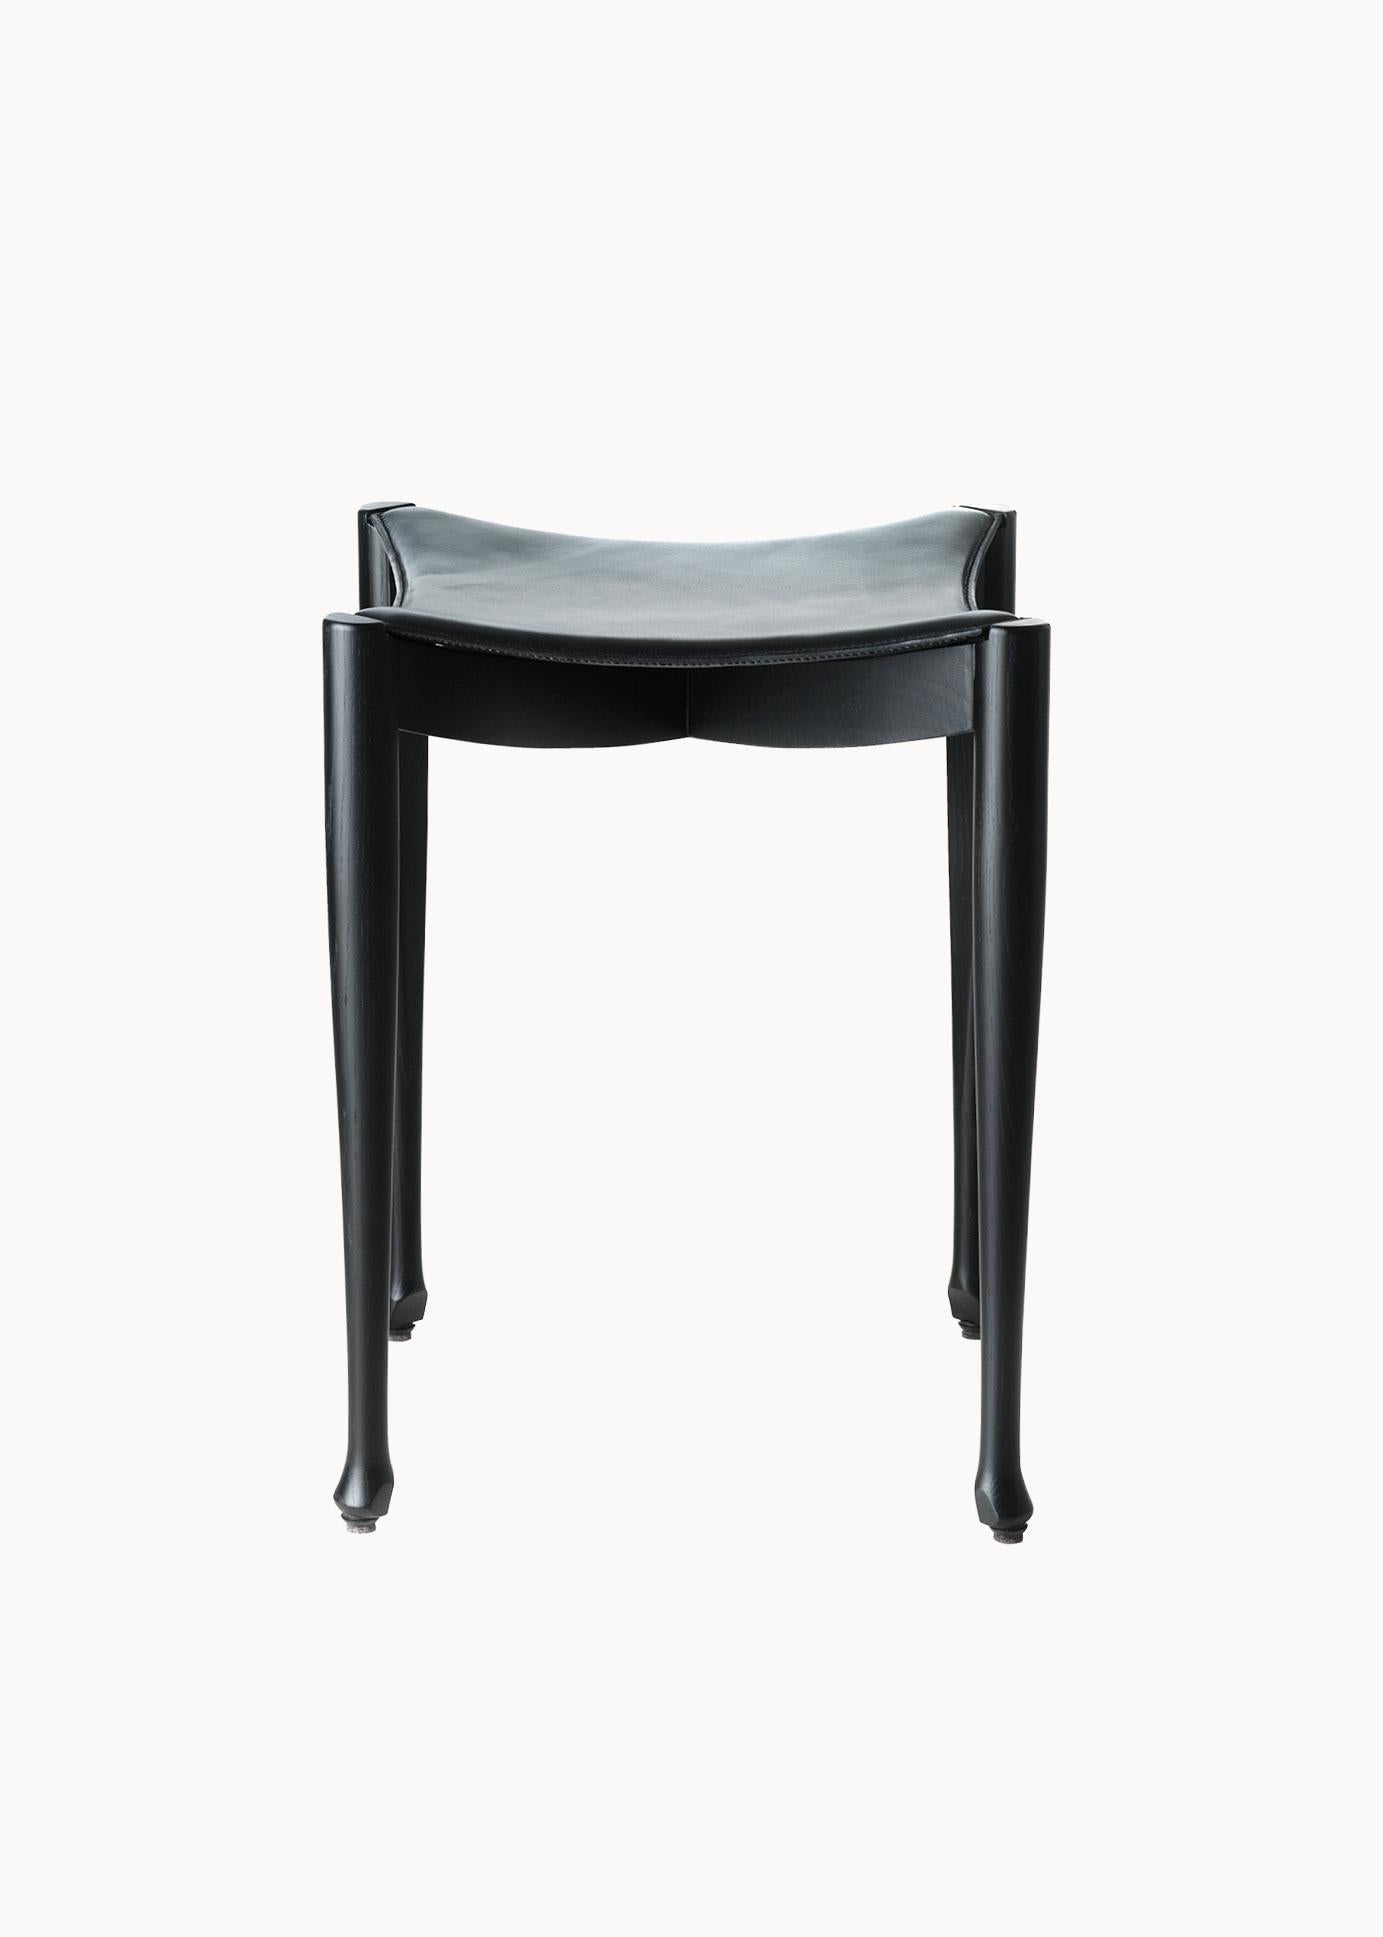 Spanish Gaulino stool by Oscar Tusquets, stained black ash wood, contemporary design For Sale